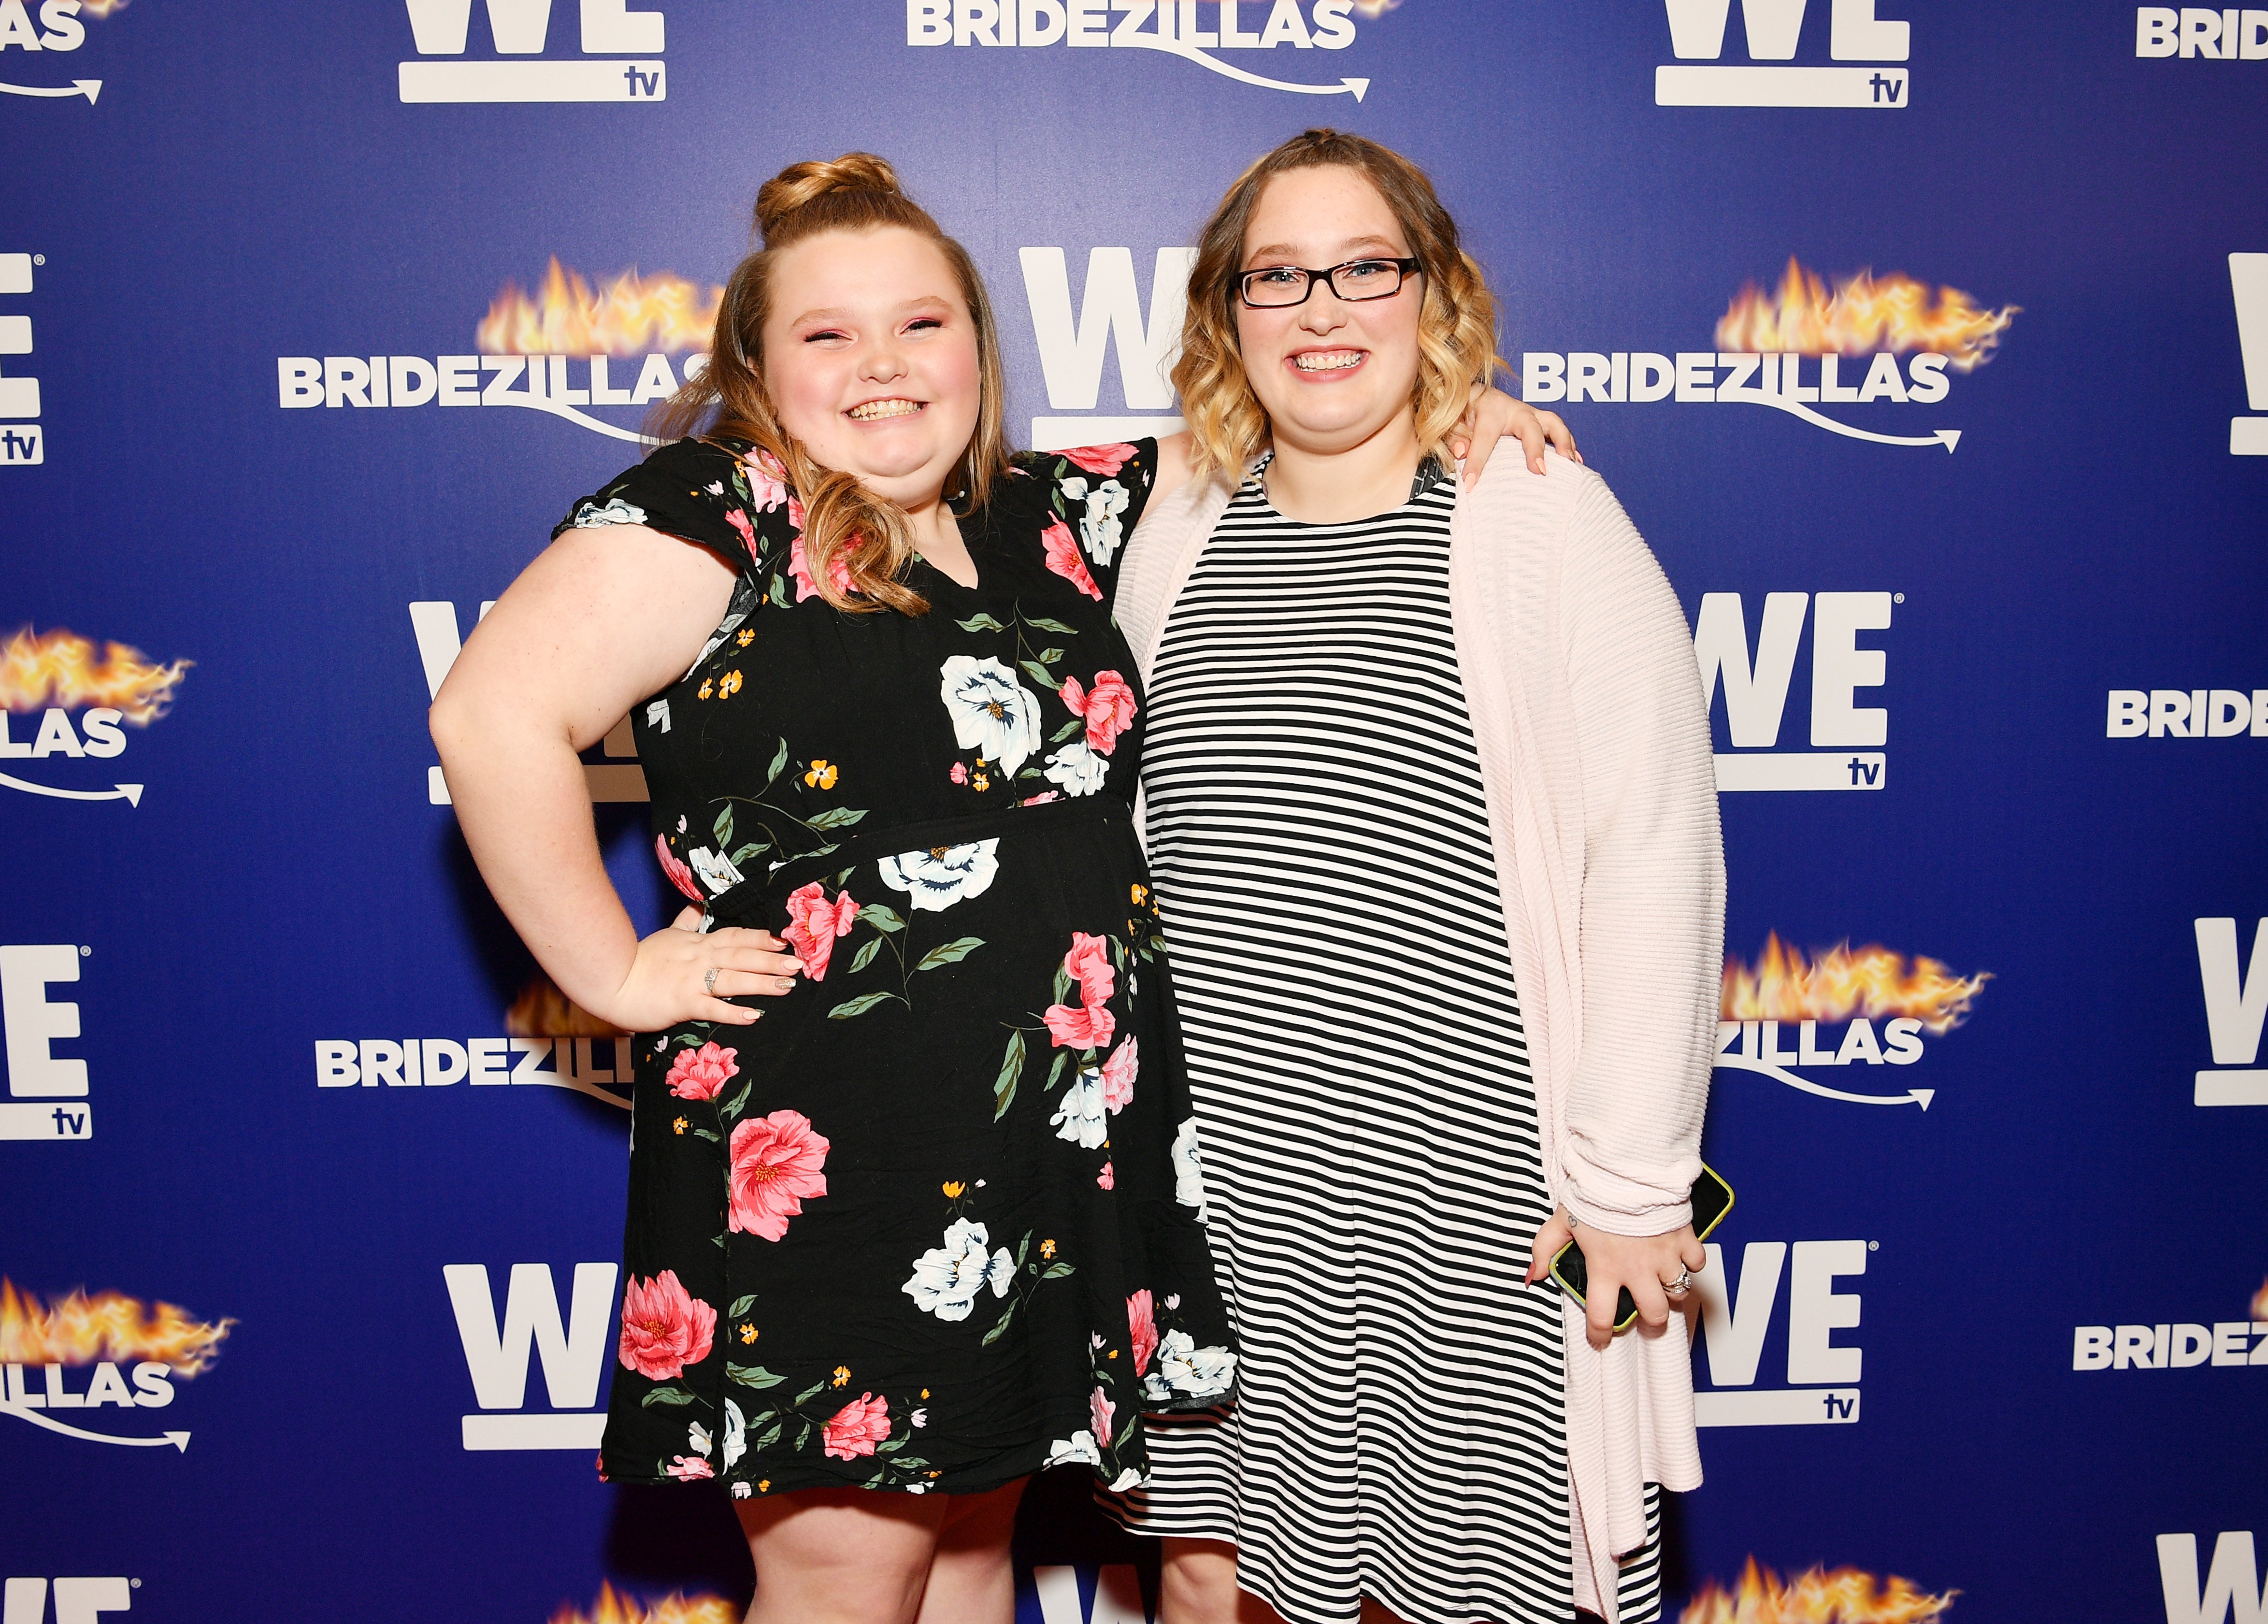 Alana "Honey Boo Boo" Thompson and Lauryn "Pumpkin" Shannon at WE tv's premiere fashion event celebrating the return of "Bridezillas," 2019. | Photo: Getty Images